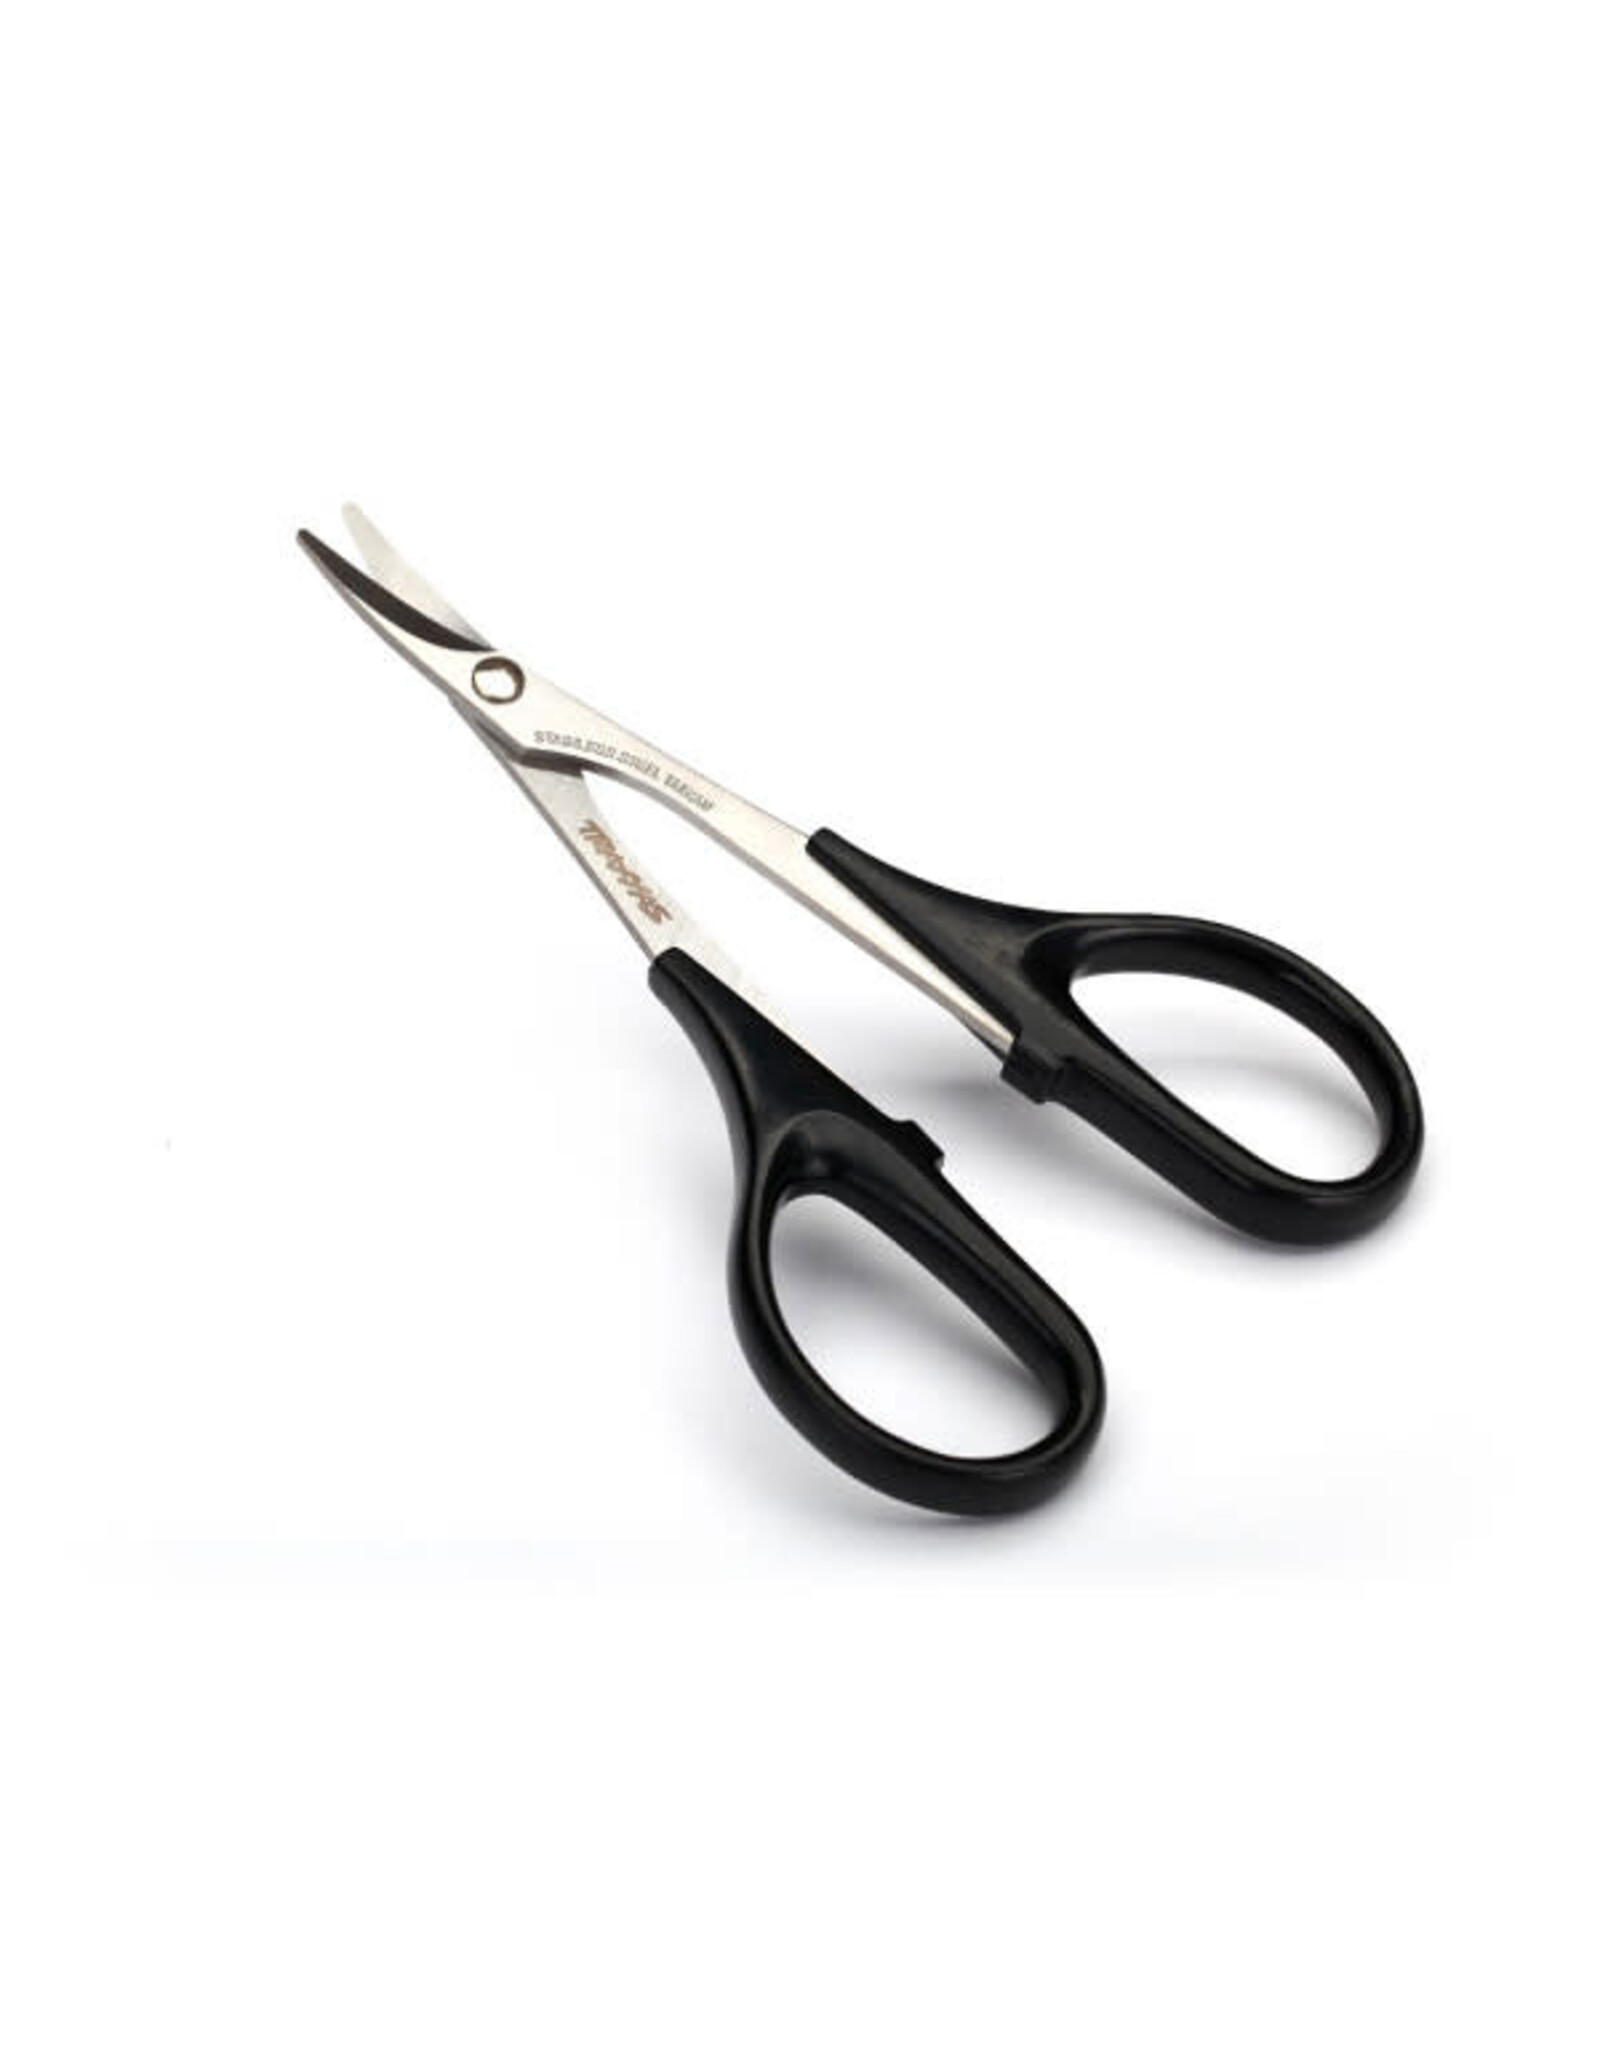 Traxxas Scissors, curved tip